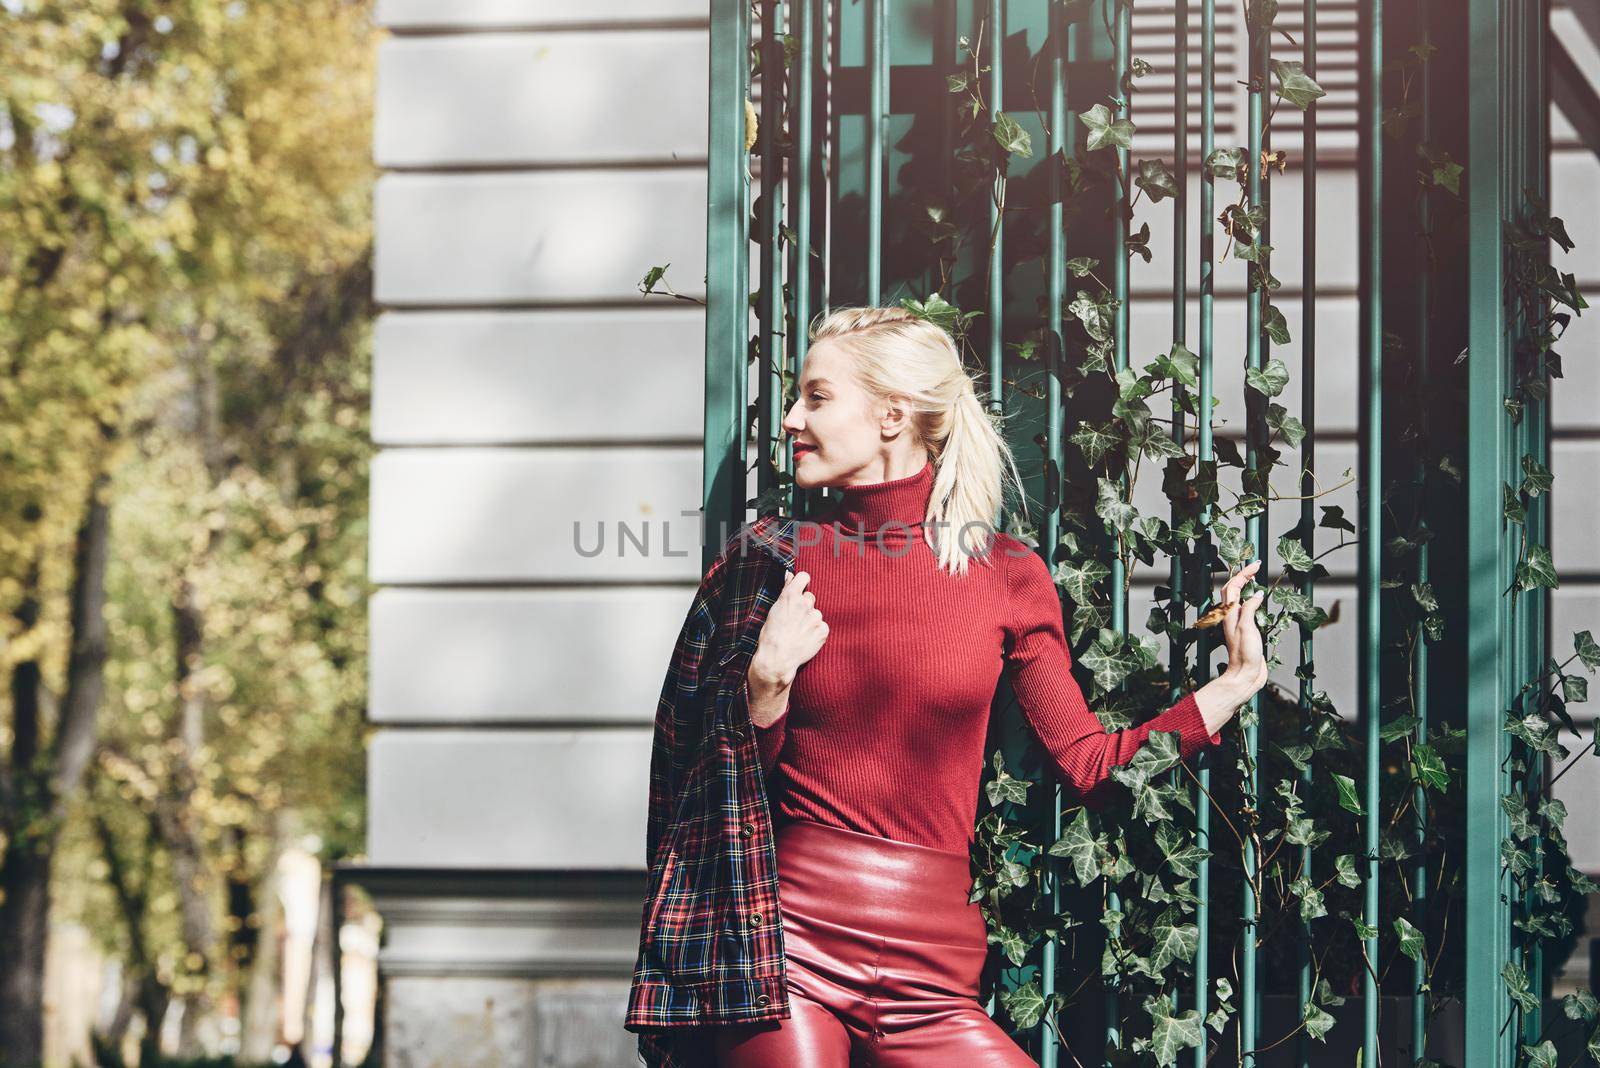 fashionable blonde girl with a red lipstick posing outdoors . Dressed in a red leather leggings, turtleneck and checkered jacket. fit figure by Ashtray25